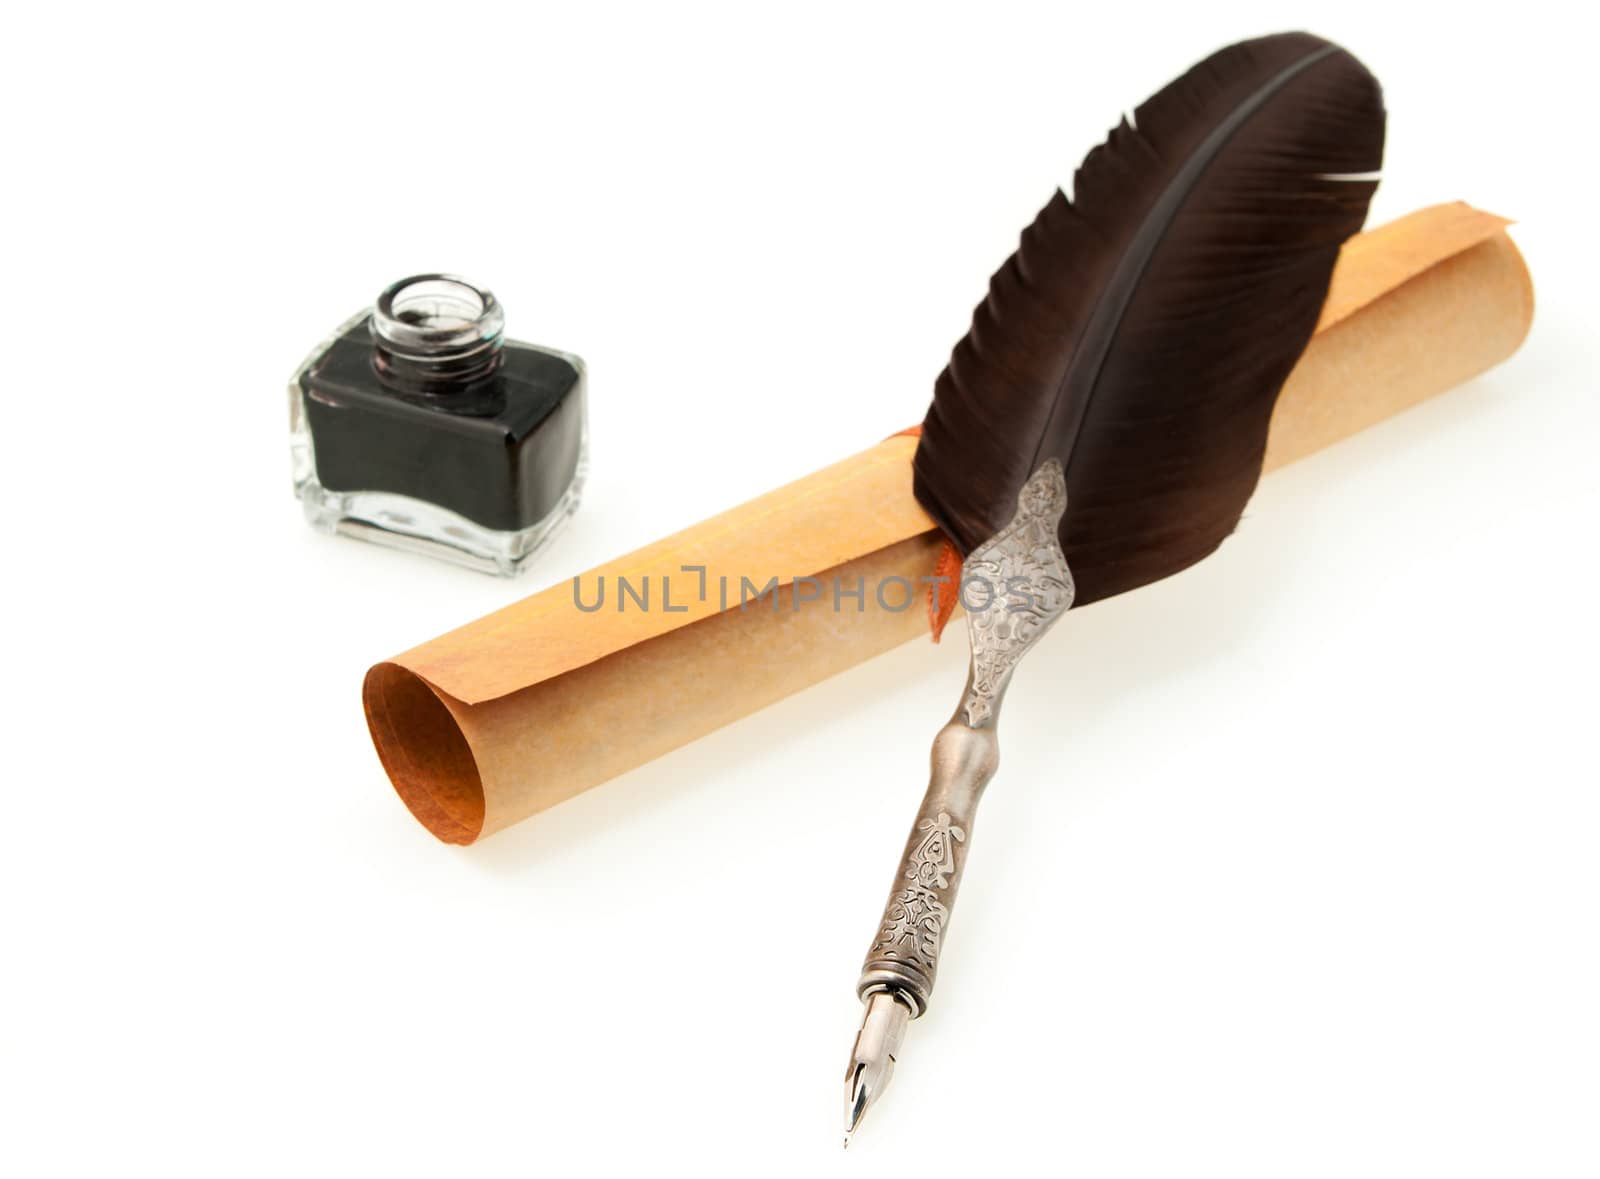 Feather quill ,inkwell and parchment roll. Isolated on white